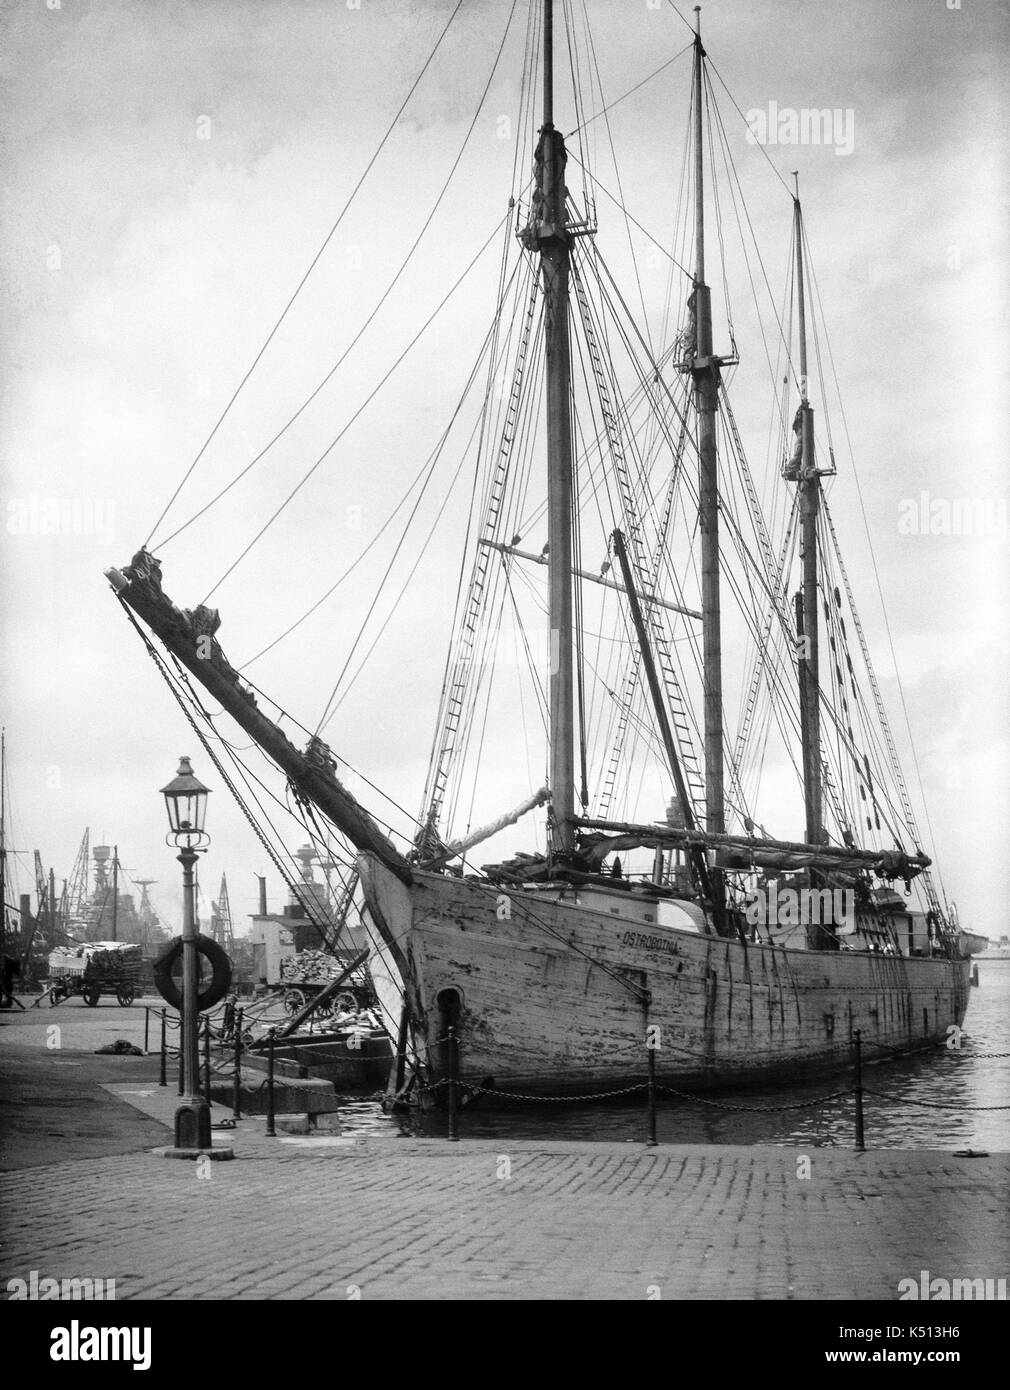 AJAXNETPHOTO. 1919 - 1930 (APPROX). PORTSMOUTH, ENGLAND. - 3 MASTED SCHOONER - THE WOODEN HULLED SAILING SCHOONER OSTROBOTNIA BERTHED AT FLATHOUSE QUAY WHILE UNLOADING A CARGO OF TIMBER. THE 800 TON SHIP WAS BUILT IN 1919 AT JAKOBSTAD AND SCRAPPED IN 1934. SHIP WAS OWNED BY GUSTAF ERIKSON OF ALAND ISLANDS FROM 1925-1934. PHOTOGRAPHER:UNKNOWN © DIGITAL IMAGE COPYRIGHT AJAX VINTAGE PICTURE LIBRARY SOURCE: AJAX VINTAGE PICTURE LIBRARY COLLECTION REF:()AVL SHI OSTROBOTNIA PMO1925 03 Stock Photo